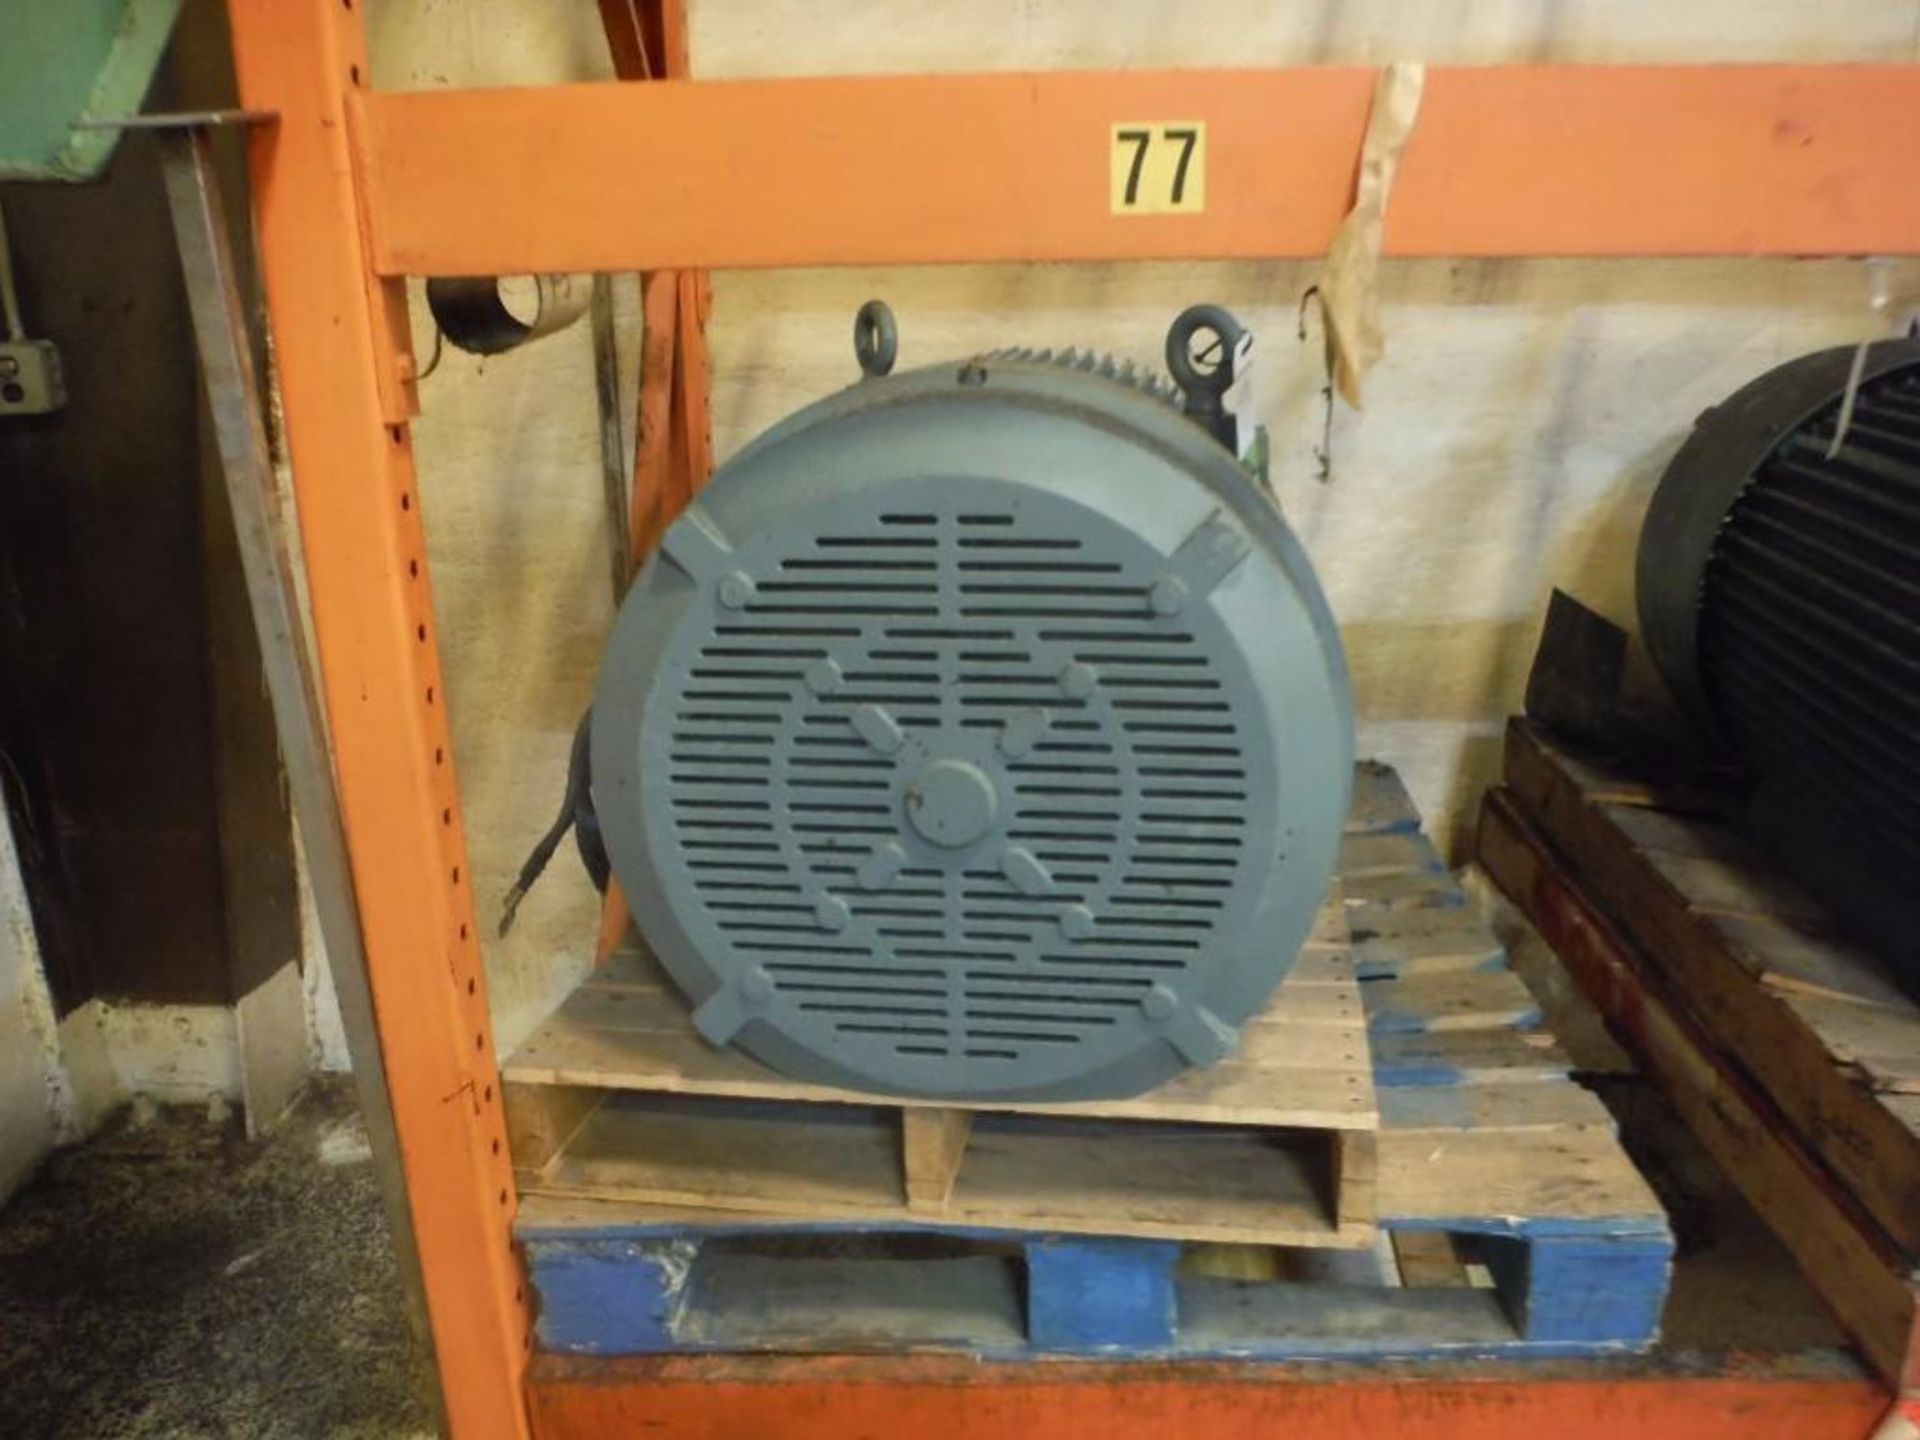 Reliance Electric 200HP Motor, Frame: 447TY  Rigging Fee: $20